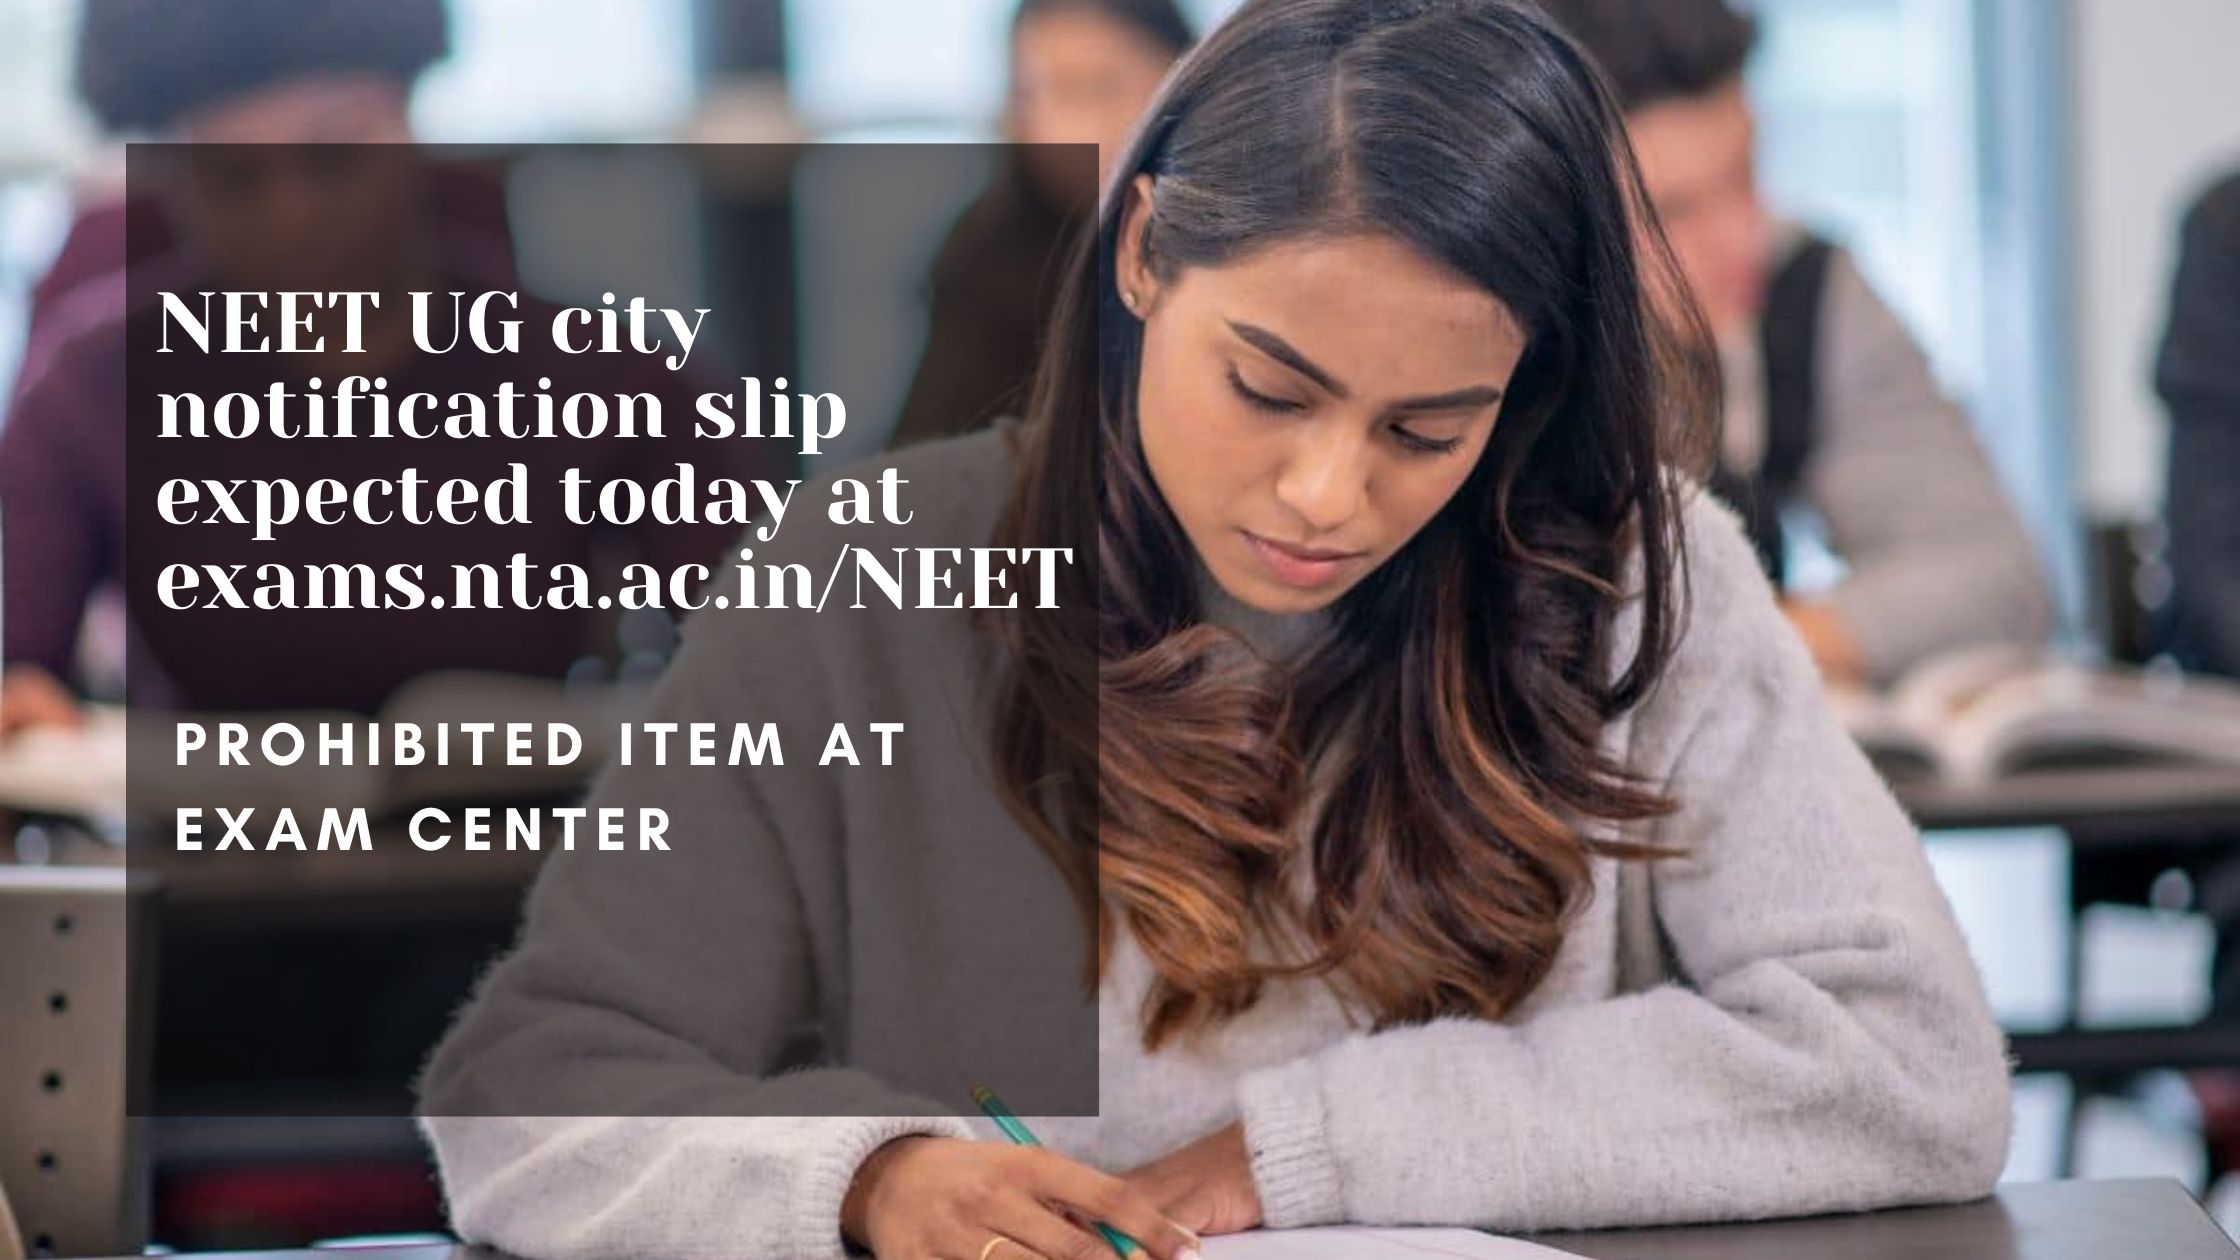 NEET UG city notification slip expected today at exams.nta.ac.in/NEET; prohibited item at exam center